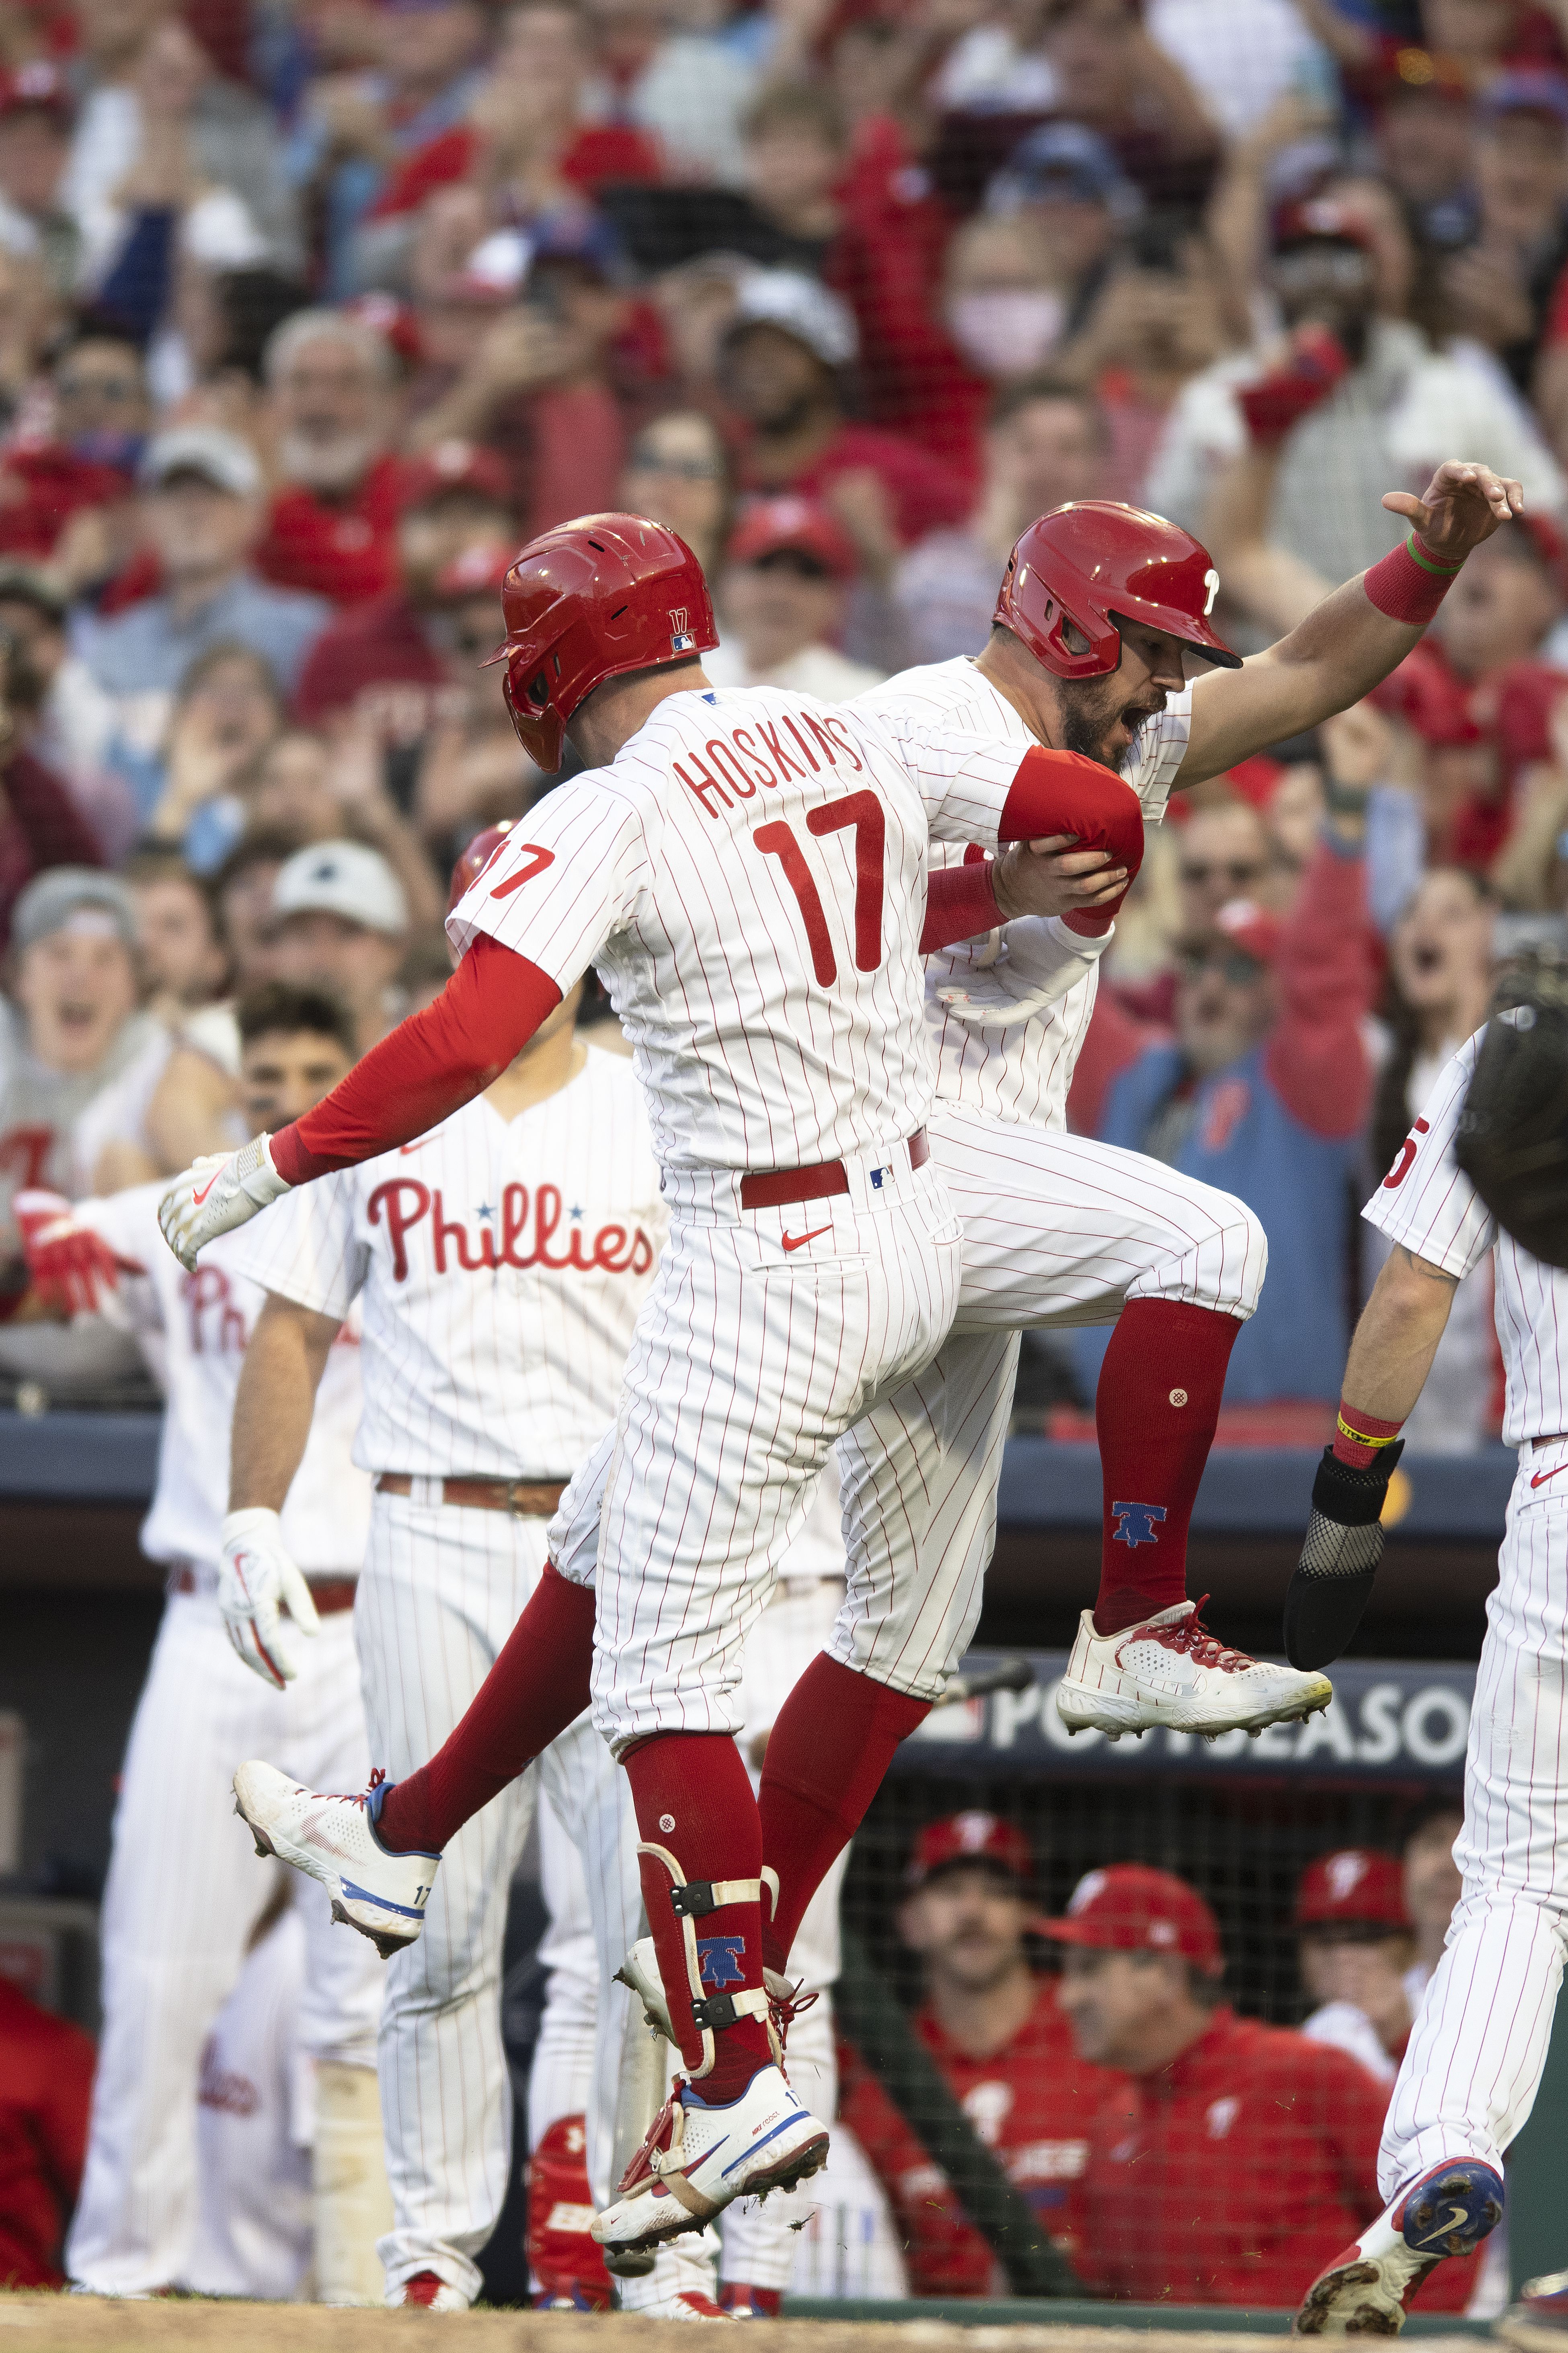 Rhys Hoskins injury: Alec Bohm, Miguel Sanó and more options for Phillies  at first base – maybe Bryce Harper? 